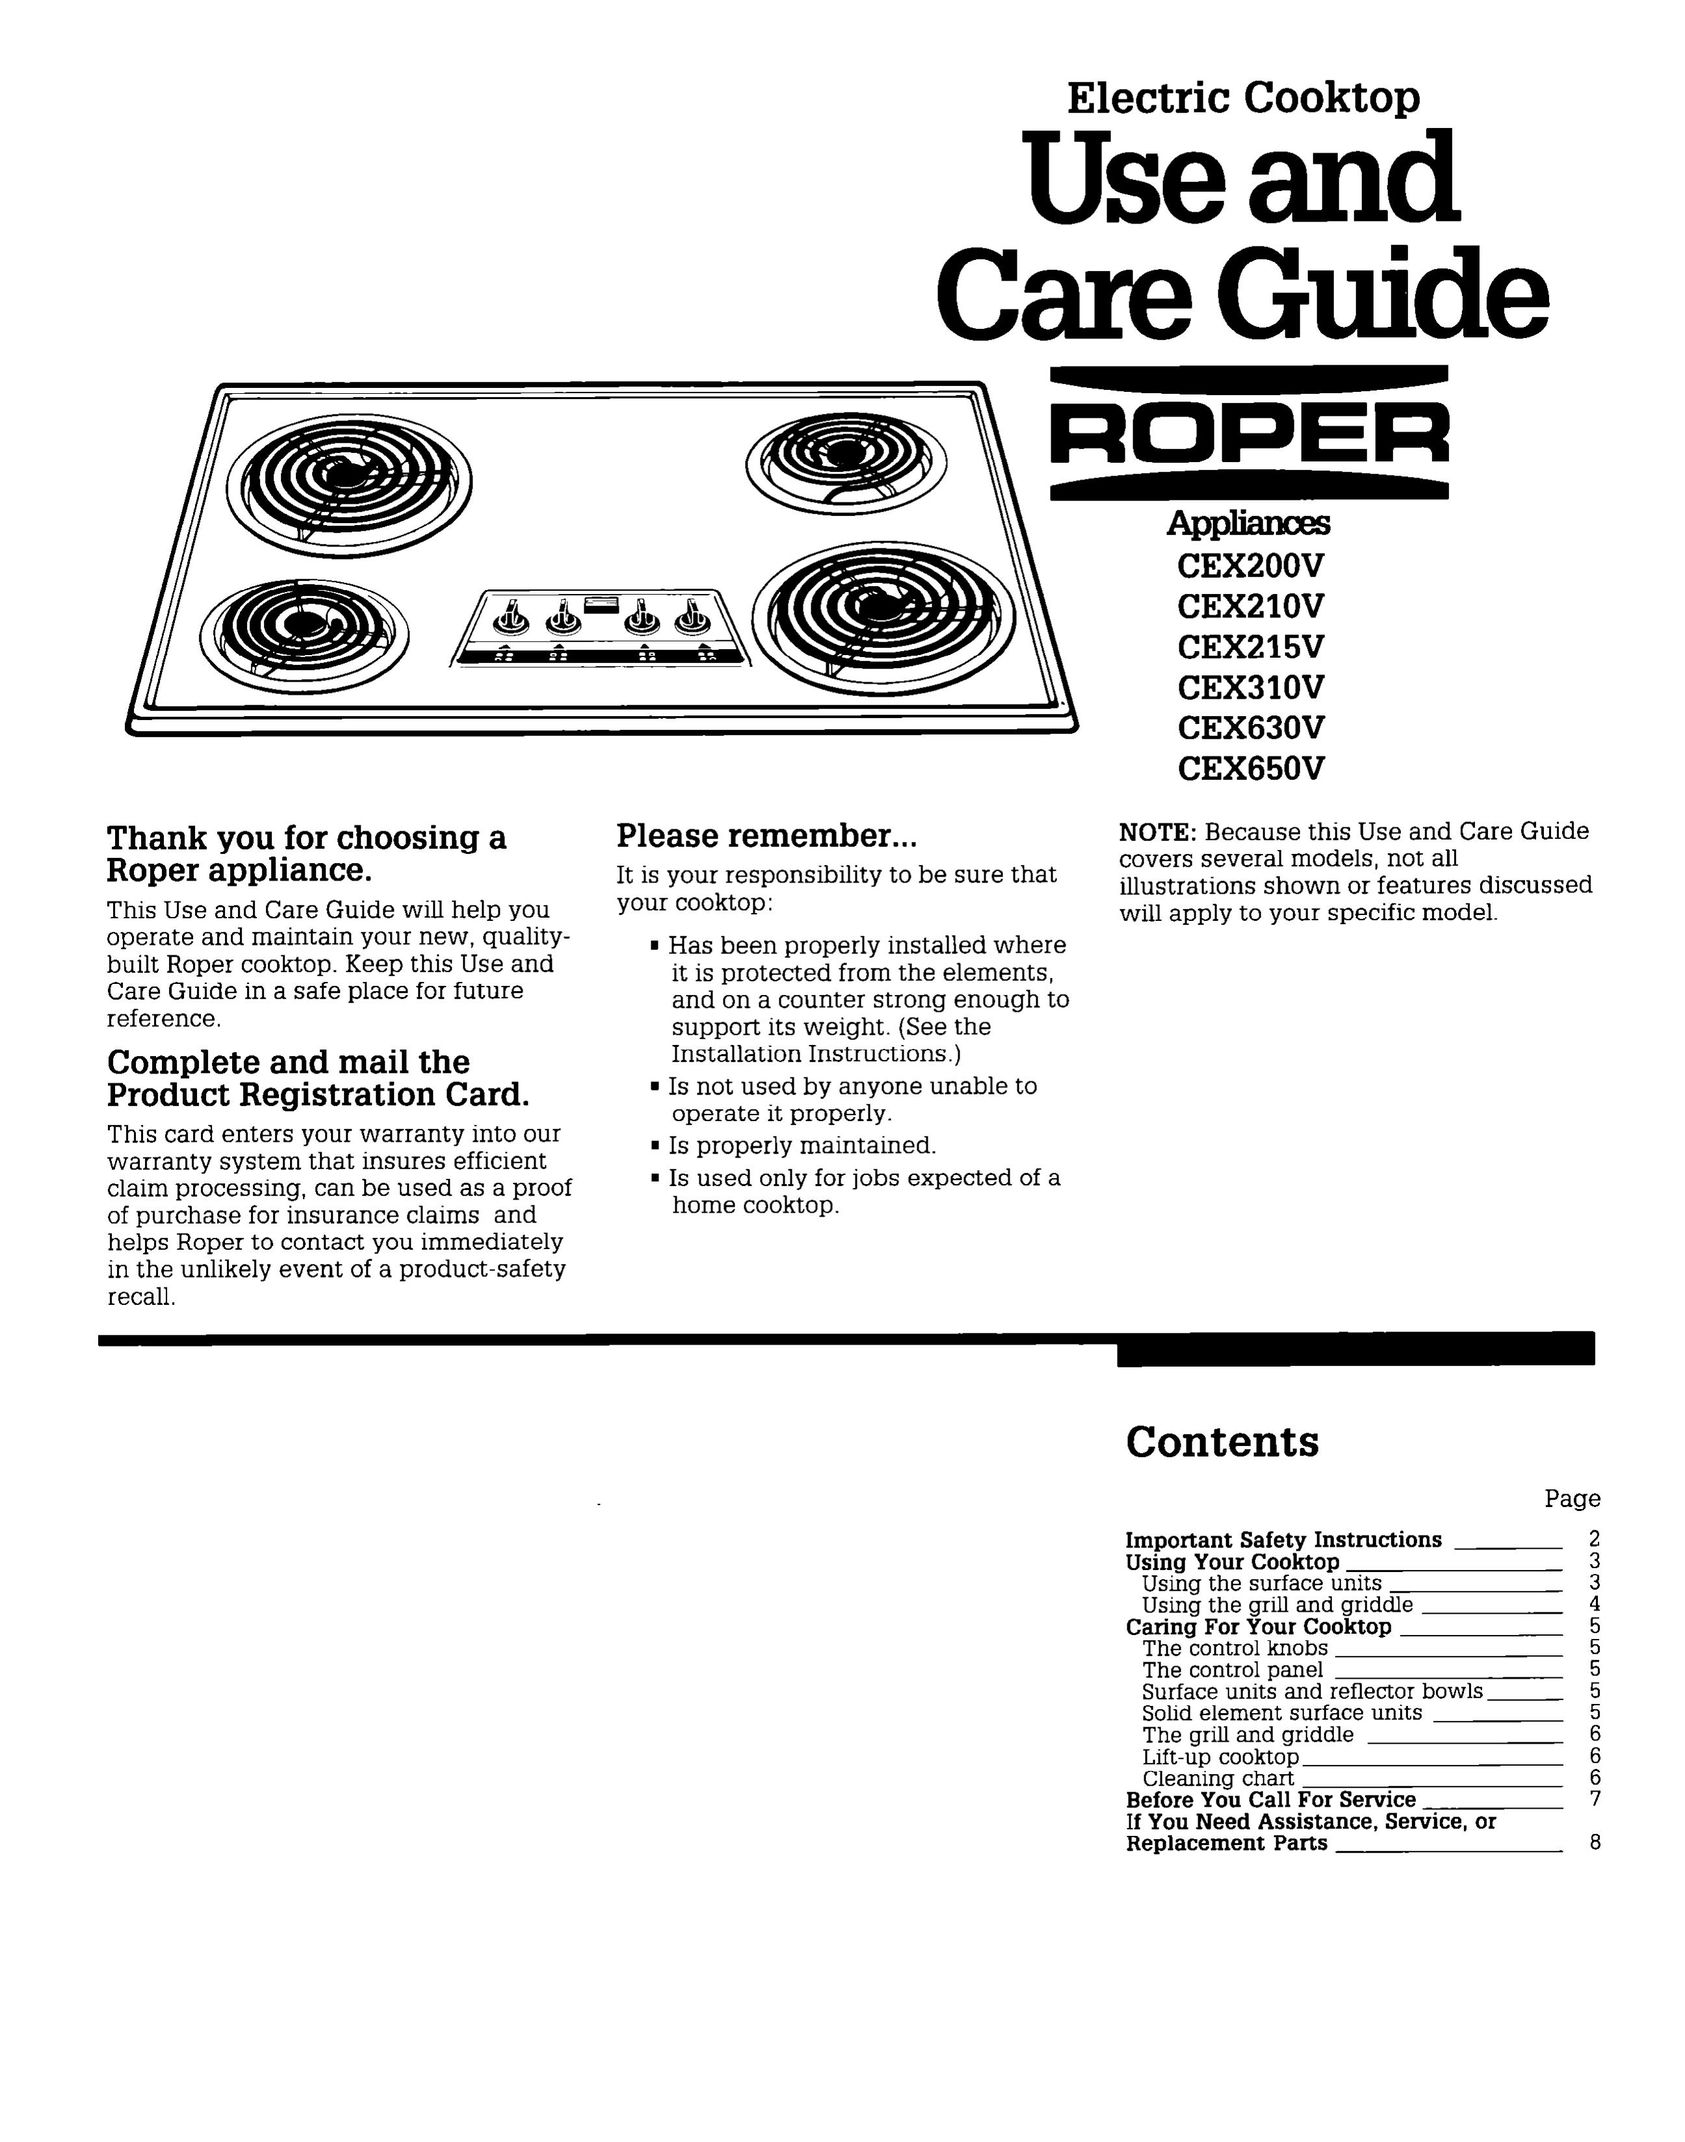 Whirlpool CEX215V Cooktop User Manual